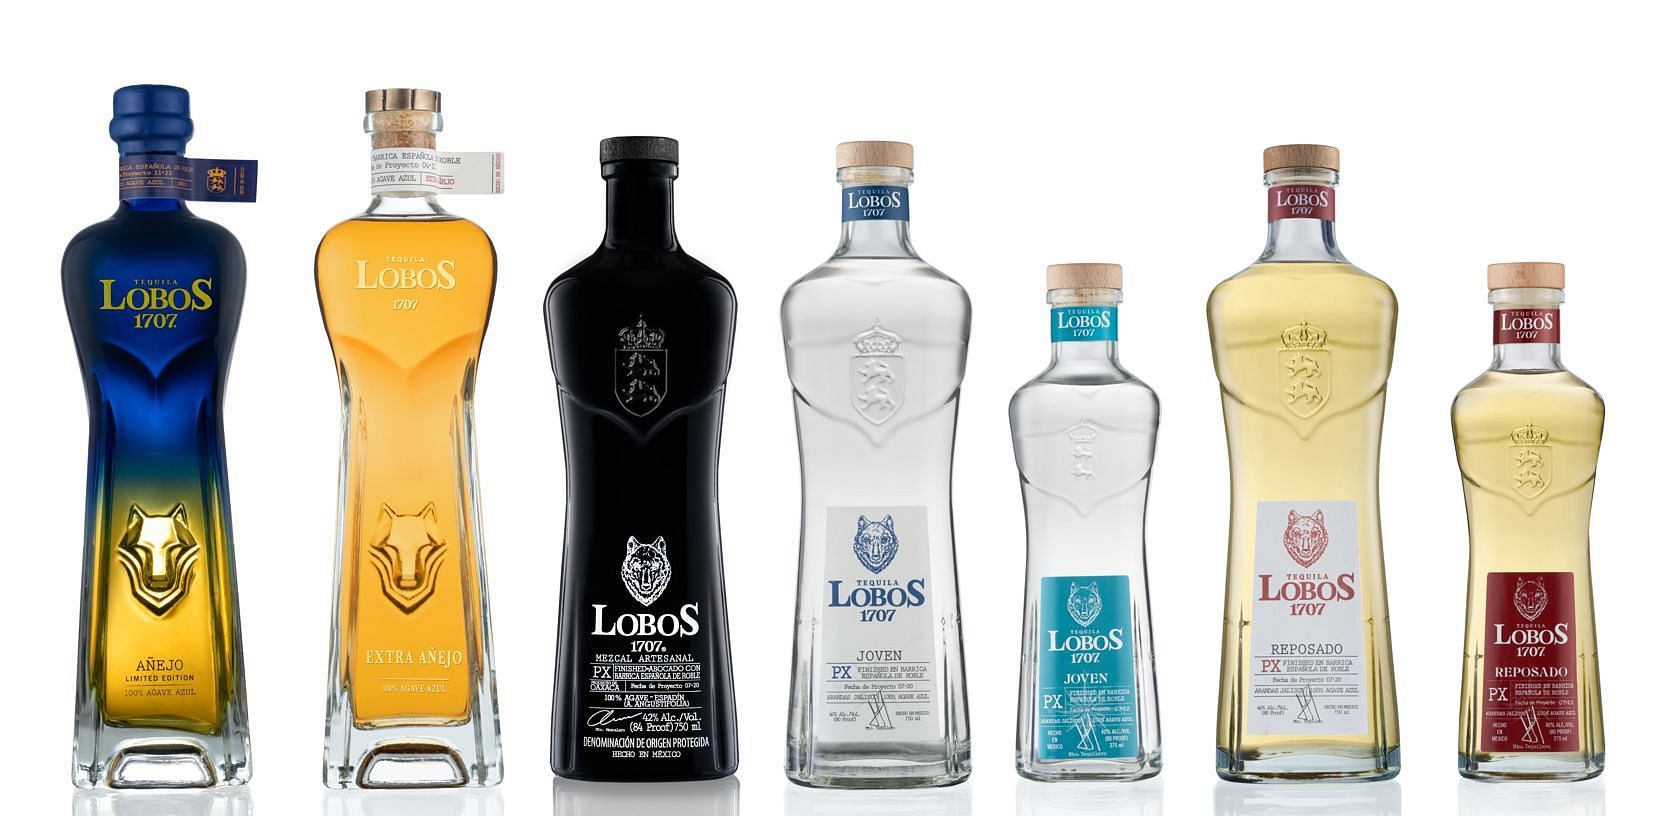 The tequila brand has added a limited-edition product to its lineup (Image via Lobos 1707)